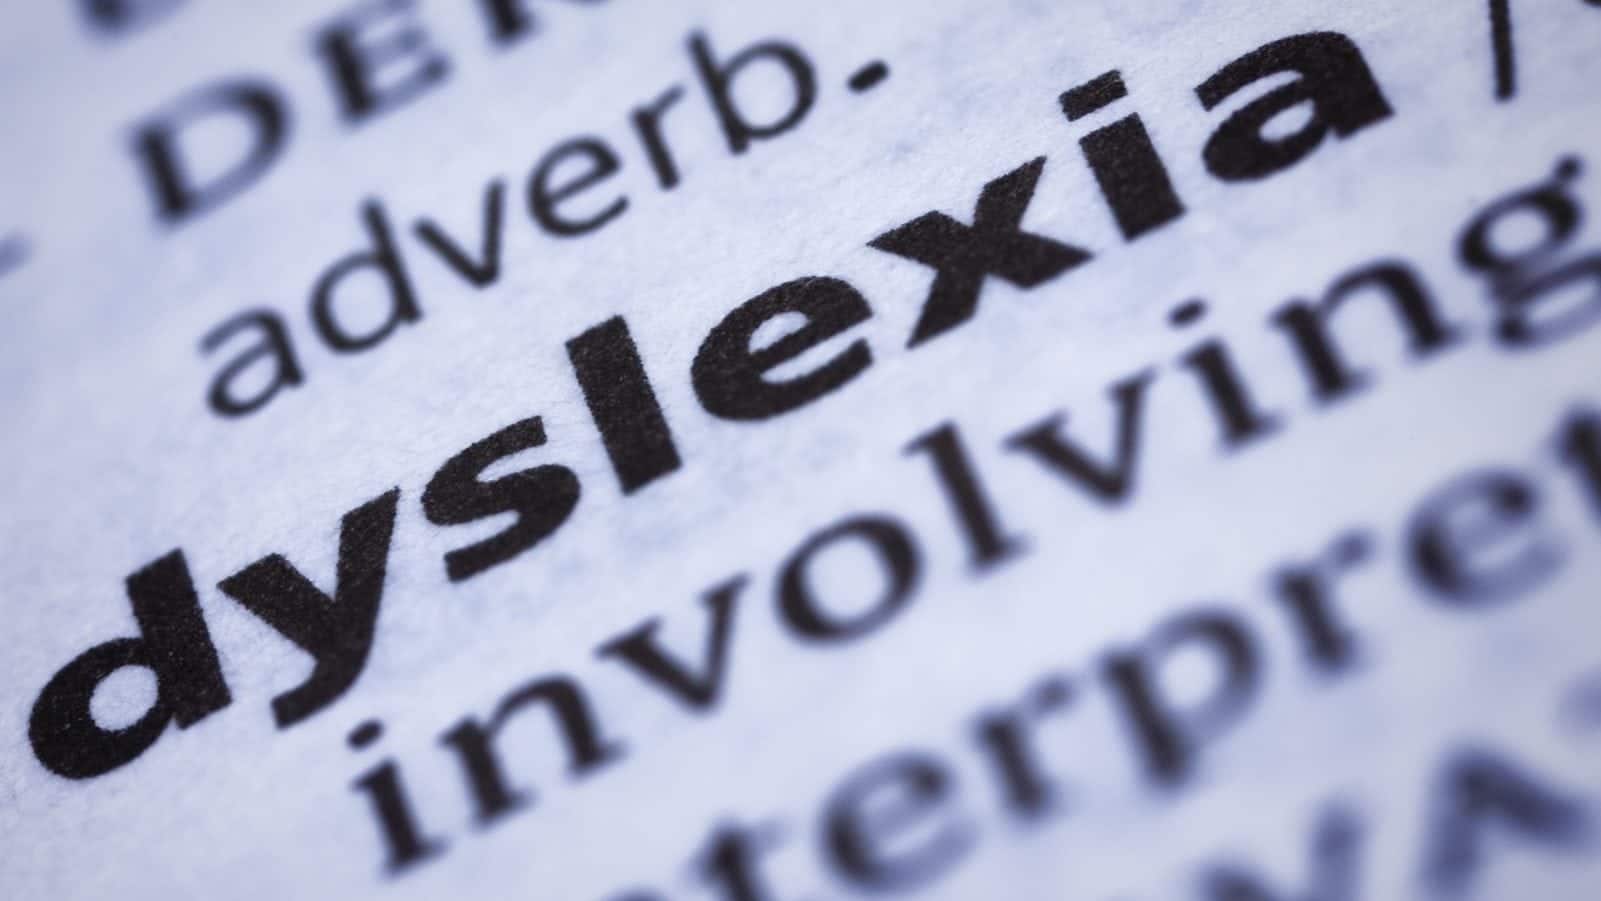 Does My Dyslexia Make Me Eligible To Receive Social Security Disability Benefits in Los Angeles?